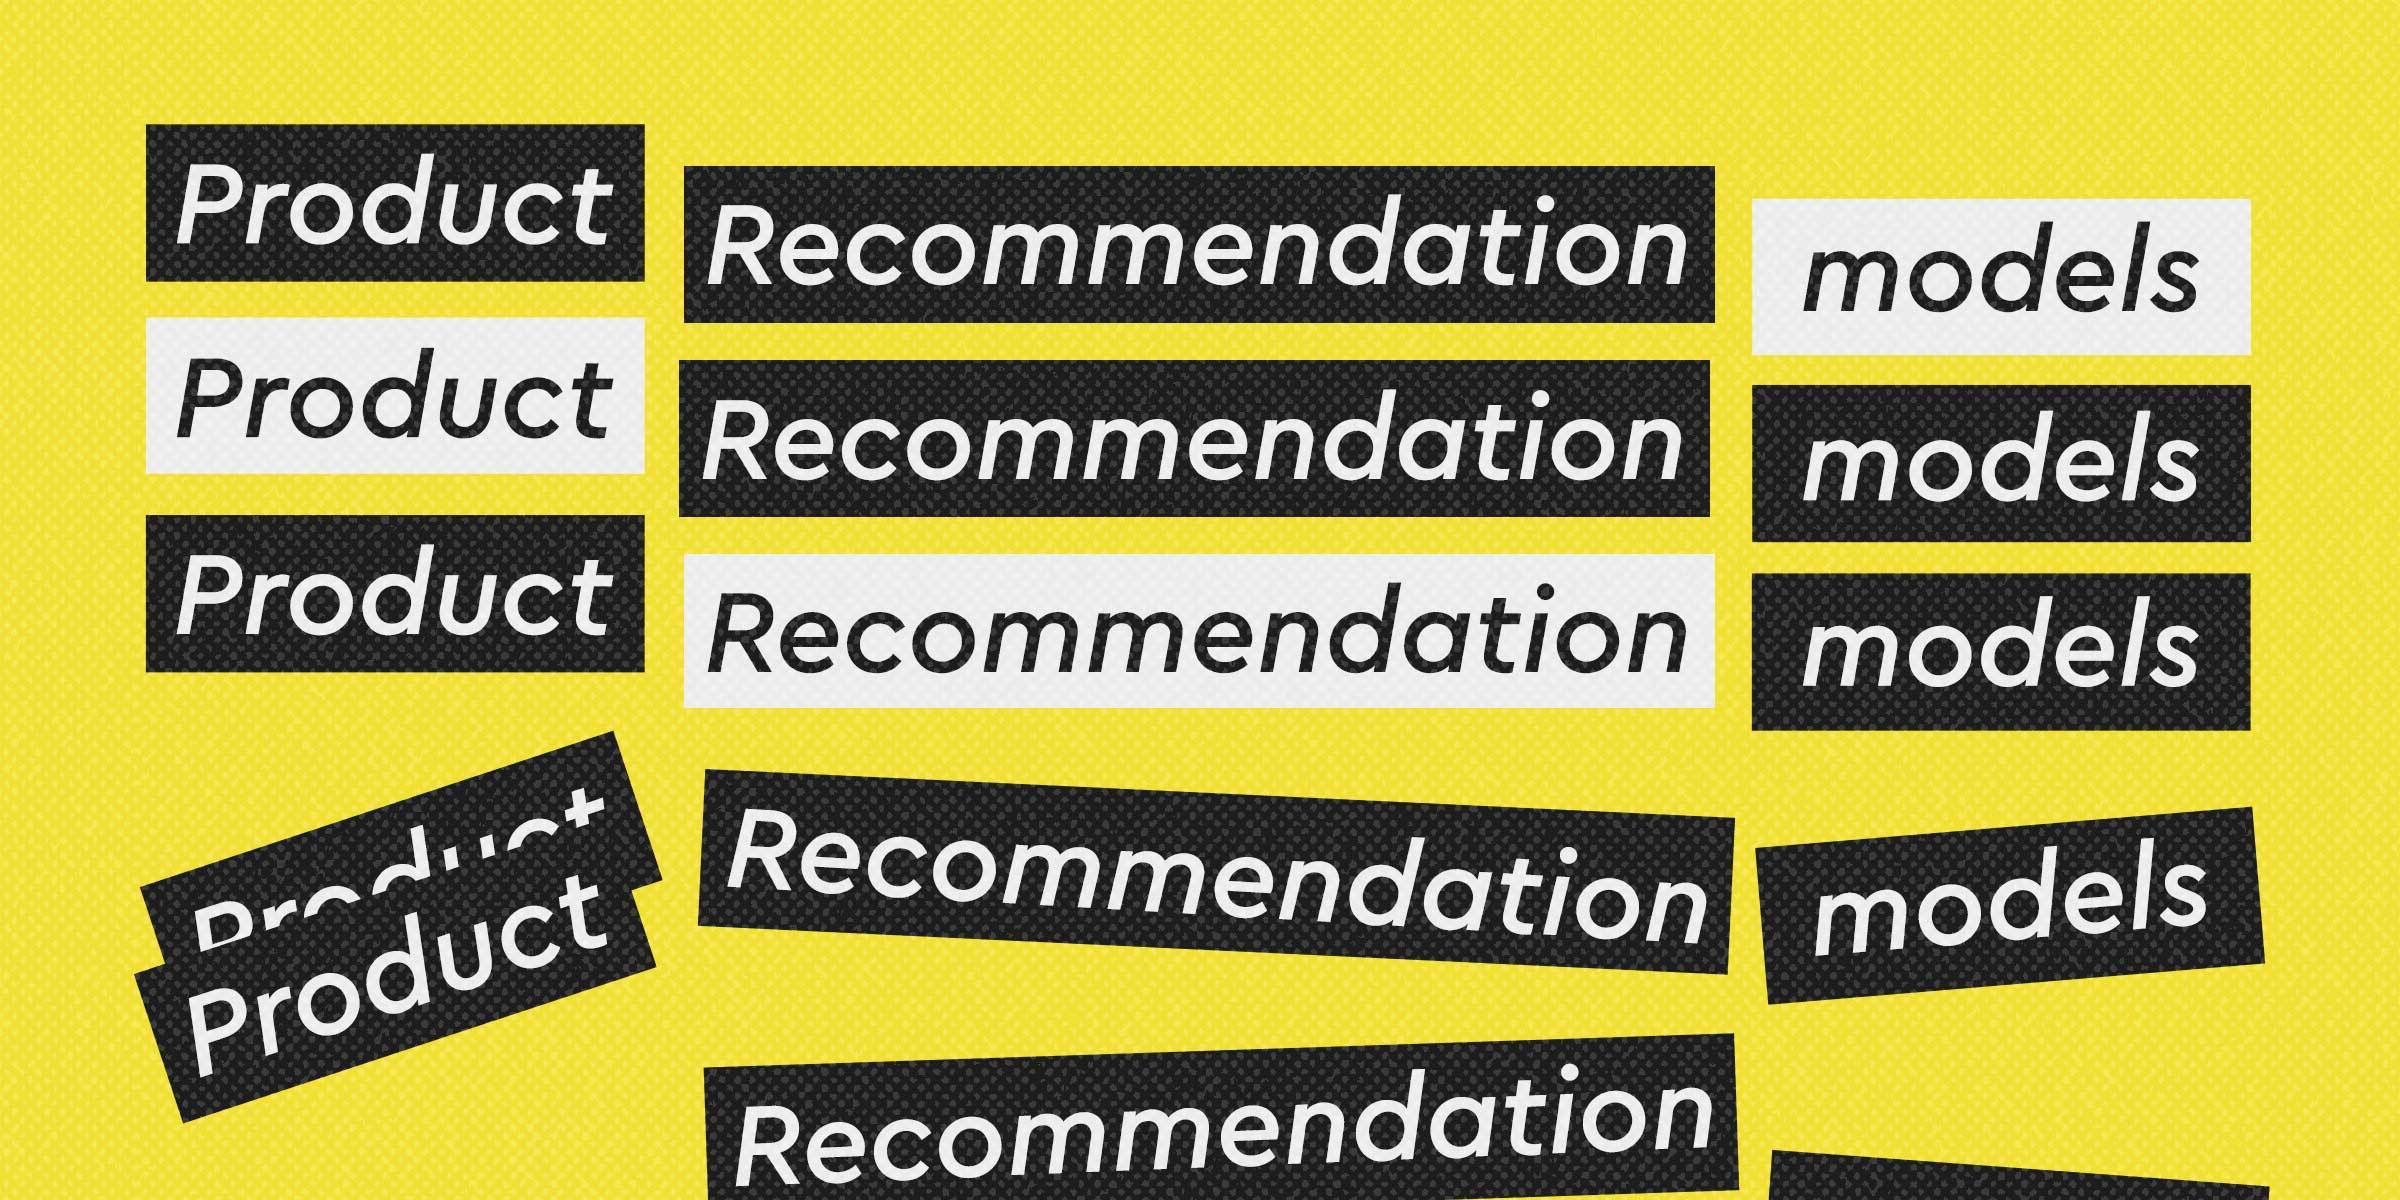 CRM Hack: Smart Recommendation Models for You to Use